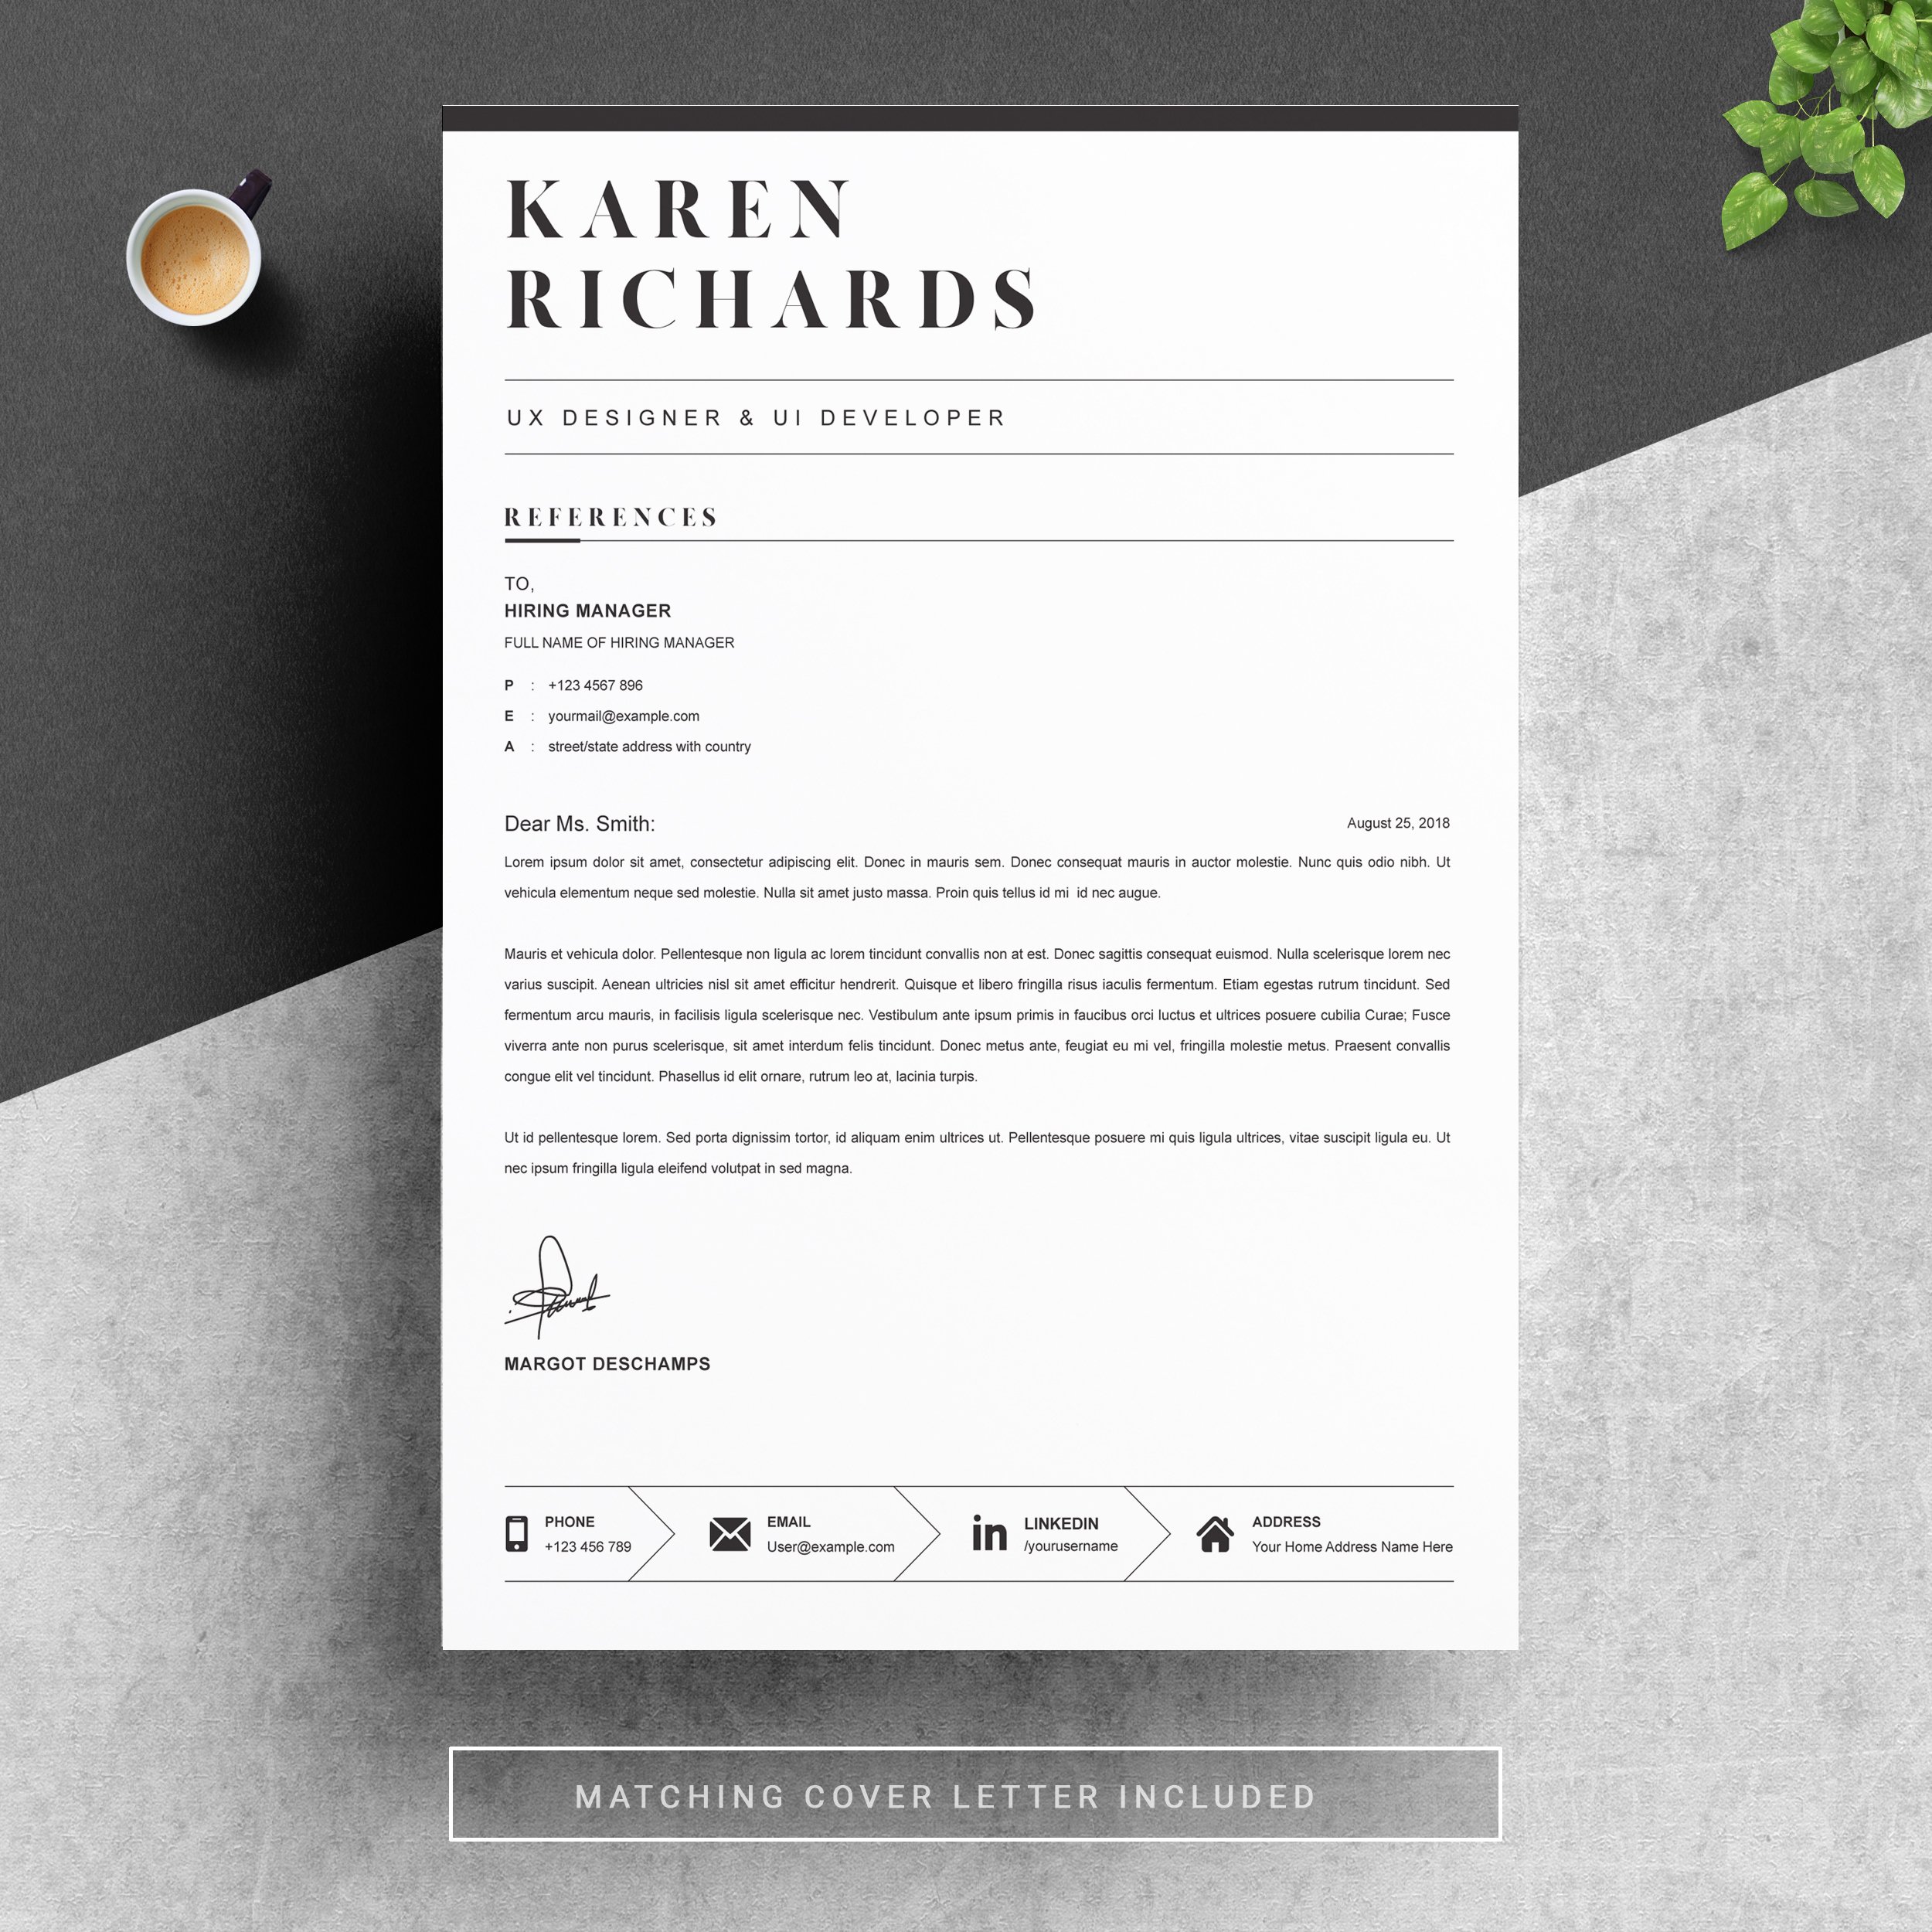 04 resume cover letter page free resume design template 63